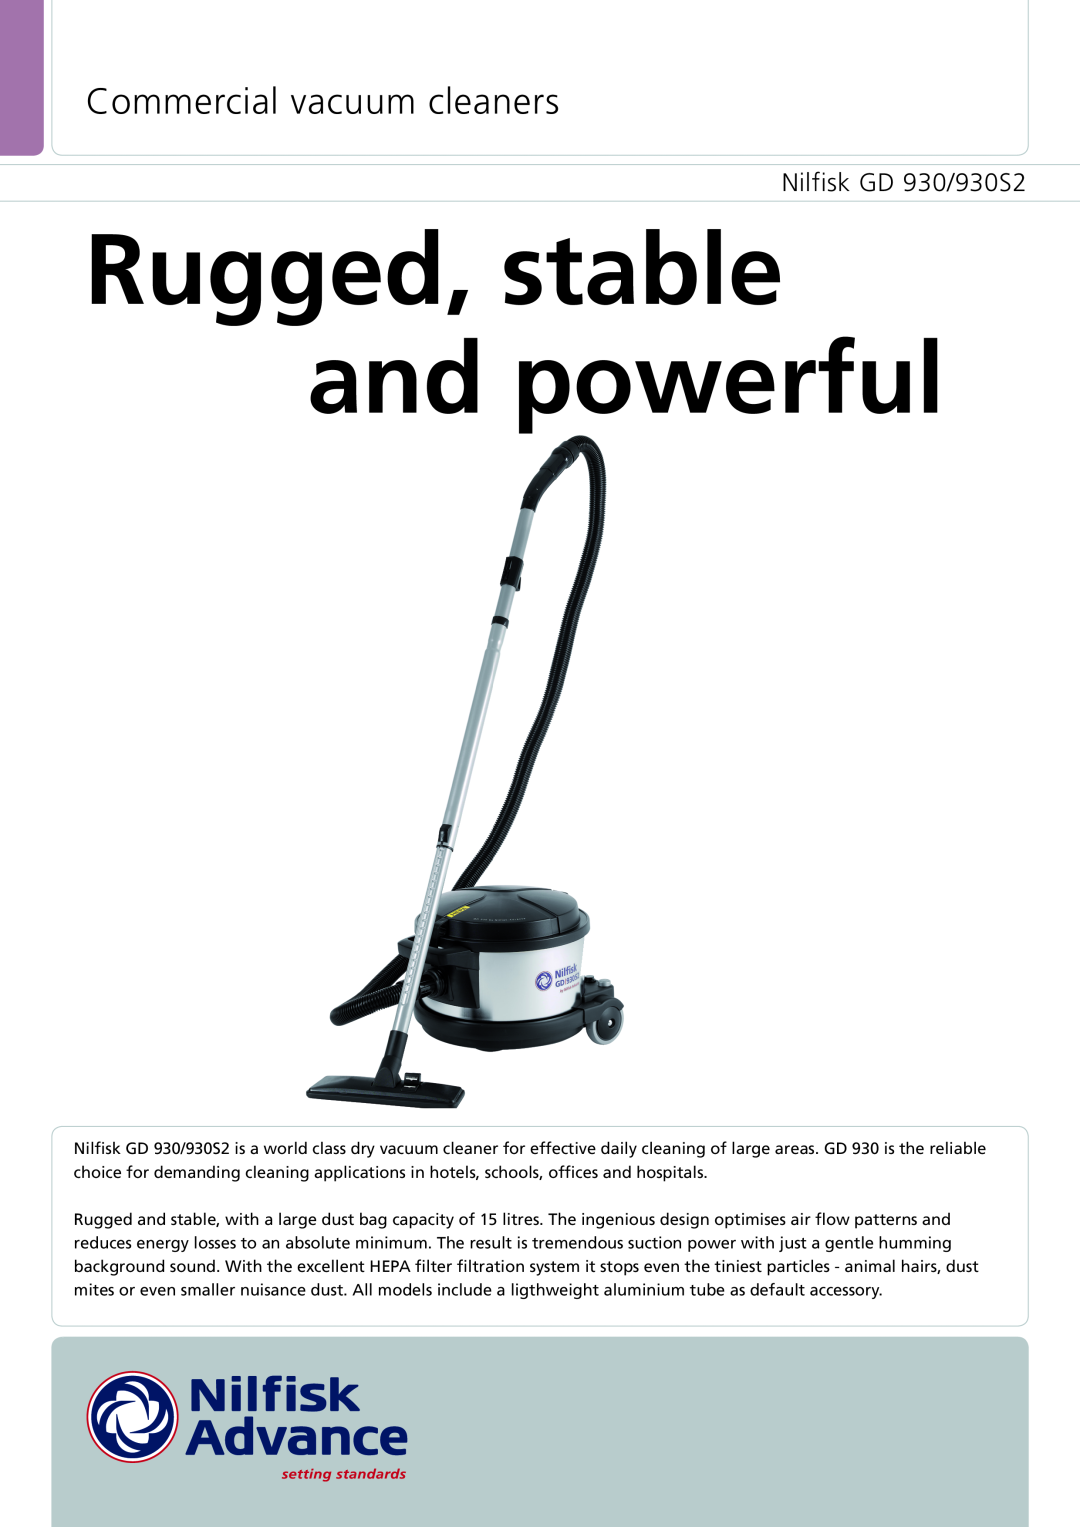 Nilfisk-ALTO GD 930S2 manual Rugged, stable and powerful, Commercial vacuum cleaners, Nilfisk GD 930/930S2 